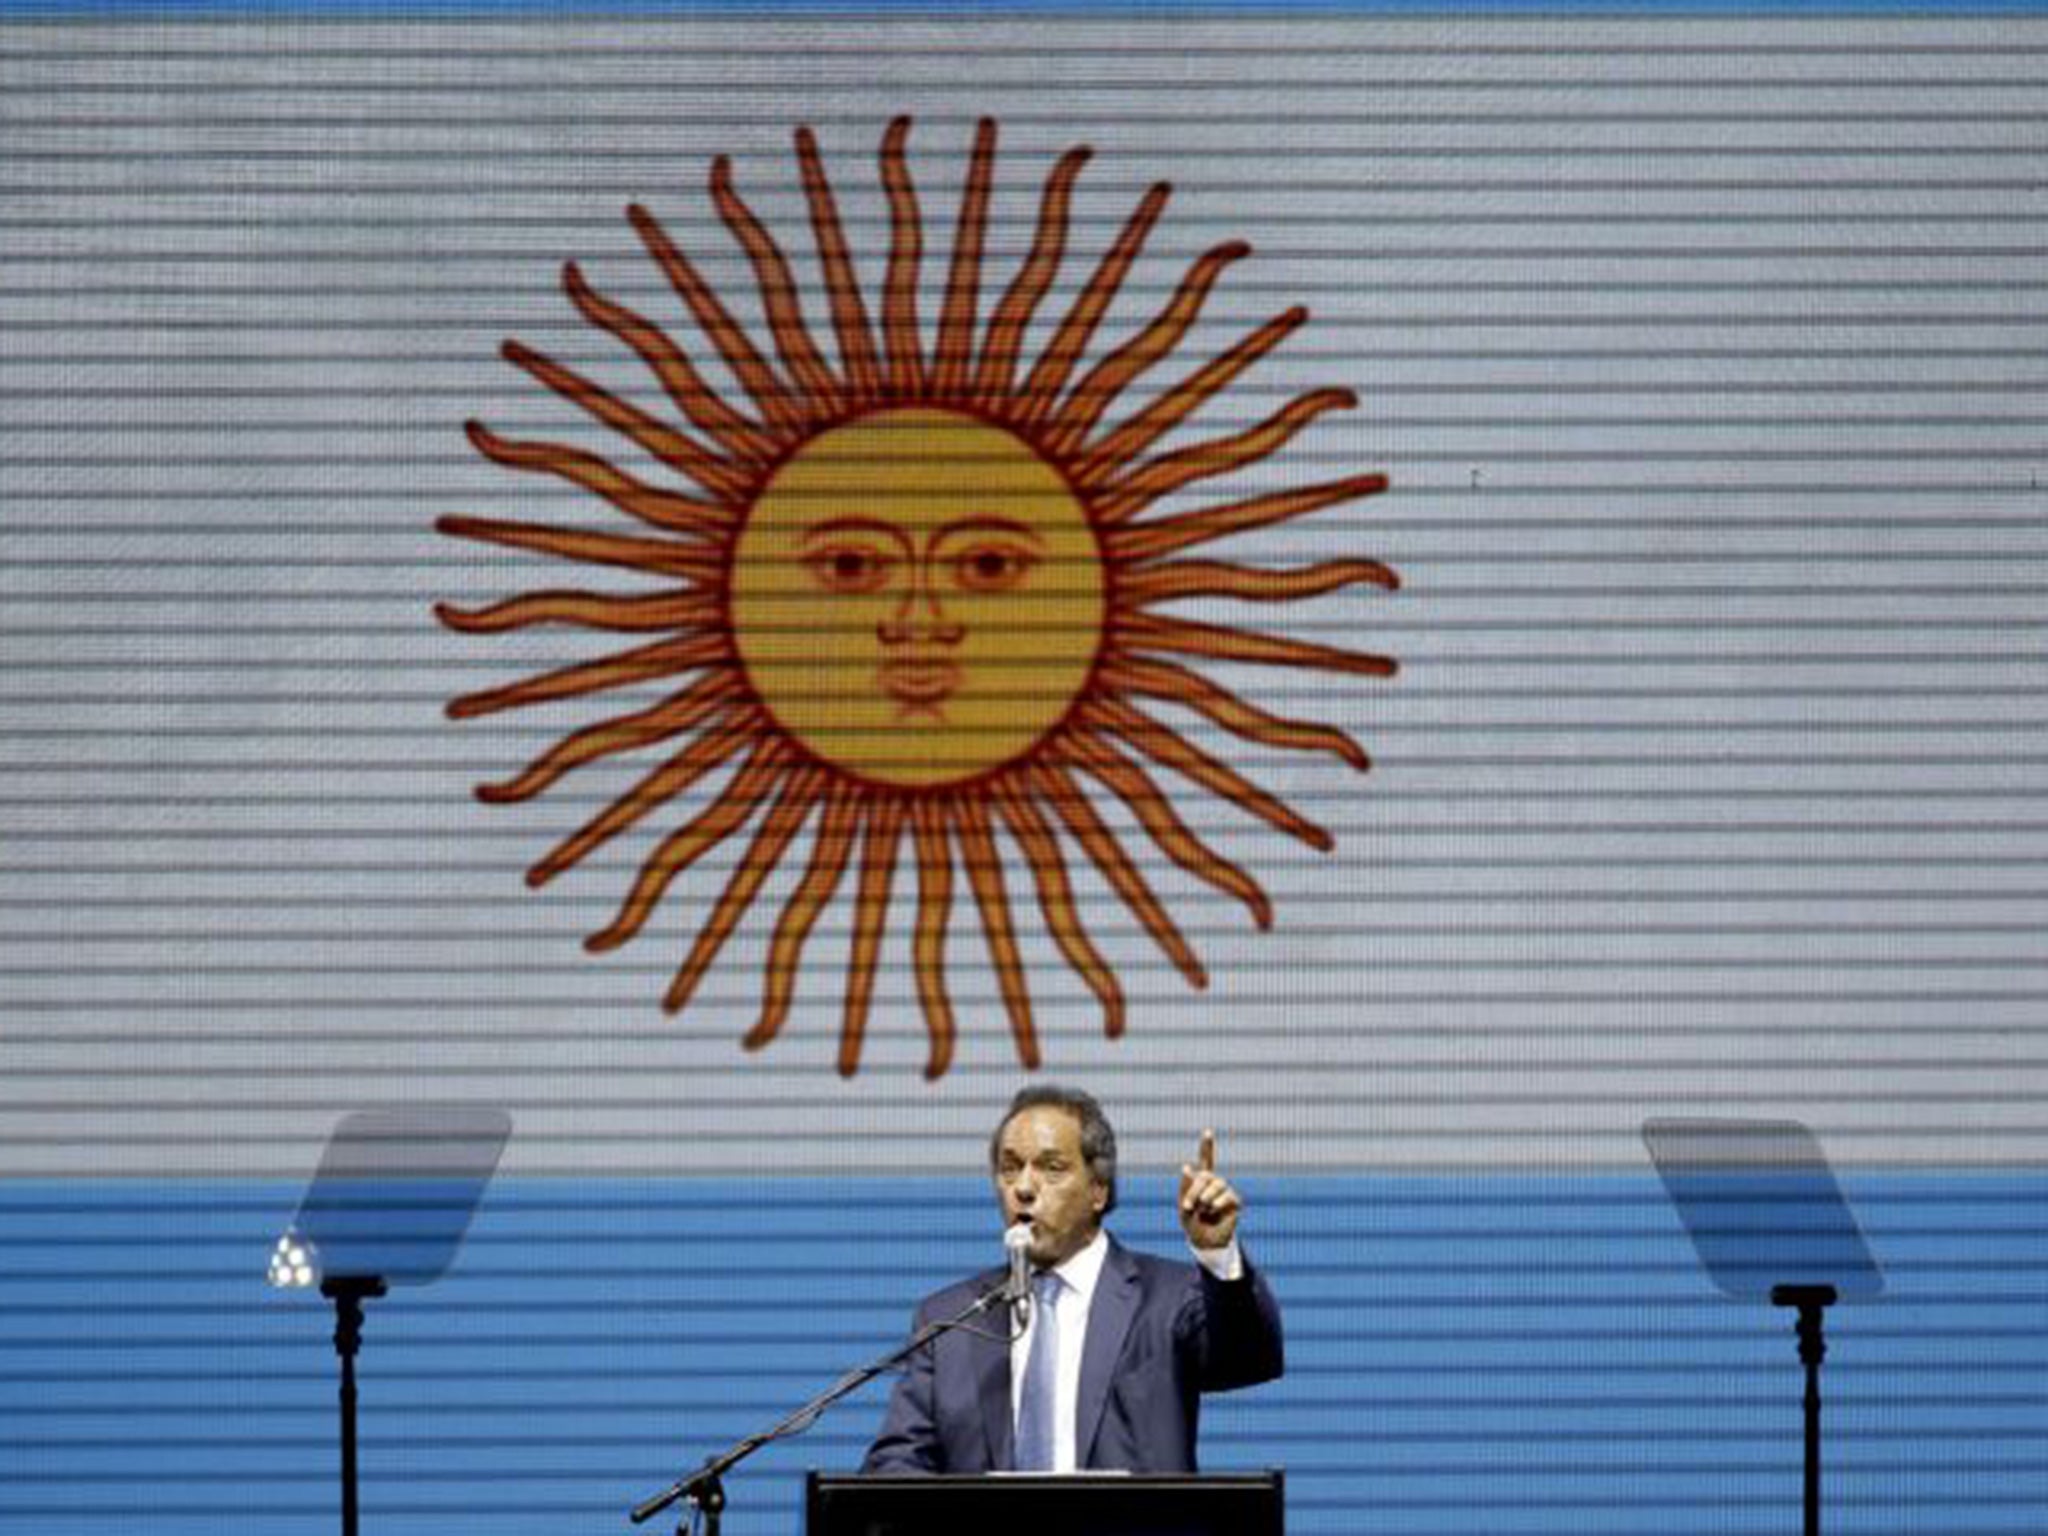 &#13;
Daniel Scioli talks to supporters at his closing campaign rally in Buenos Aires&#13;